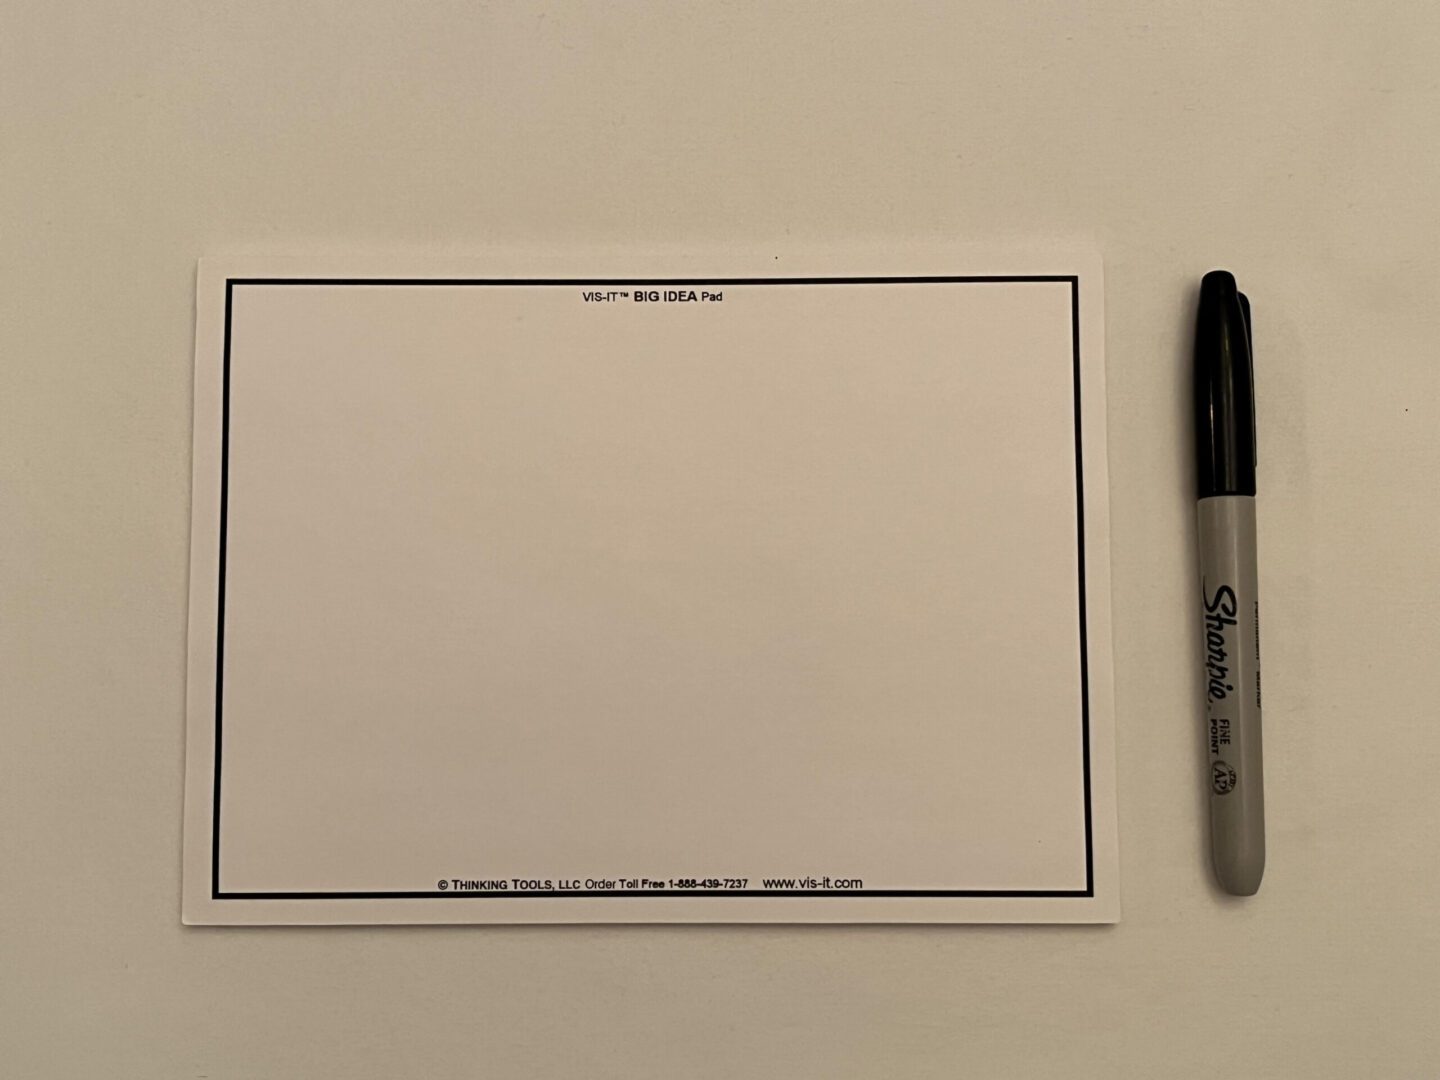 A WHITE VIS-IT™ Post-it Big Idea Pad 8x6 in. (50 sheets) with a black marker on it.